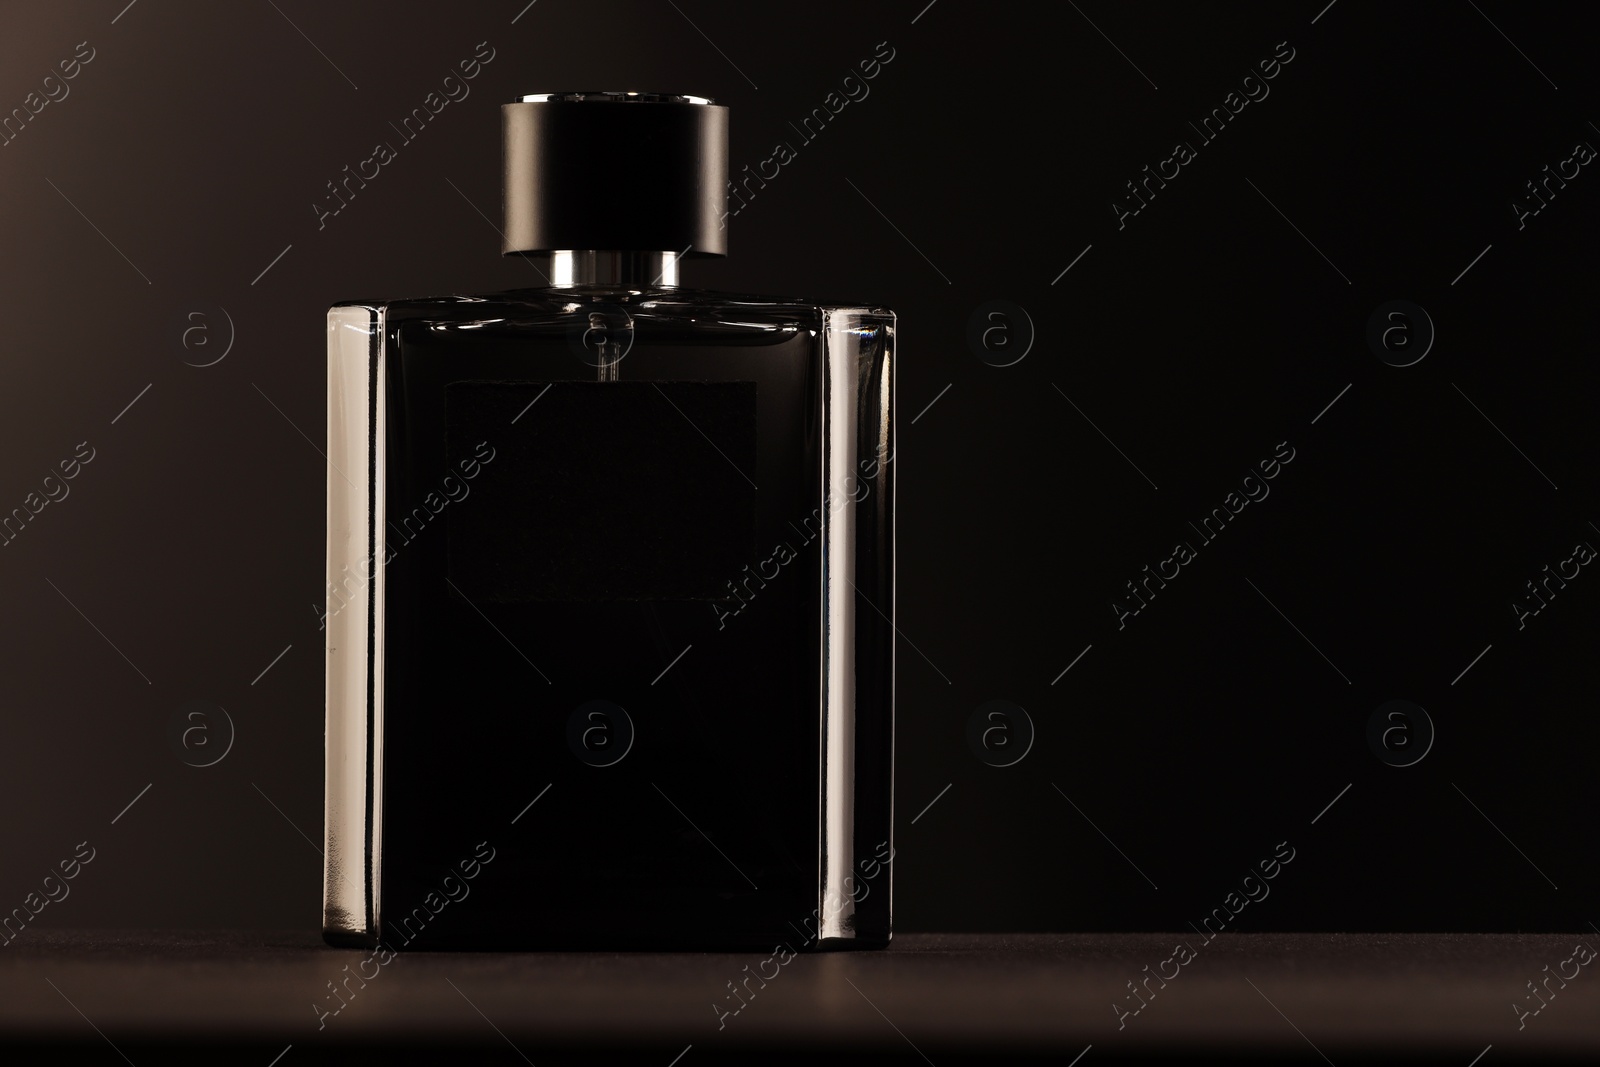 Photo of Luxury men`s perfume in bottle on table against dark background, space for text